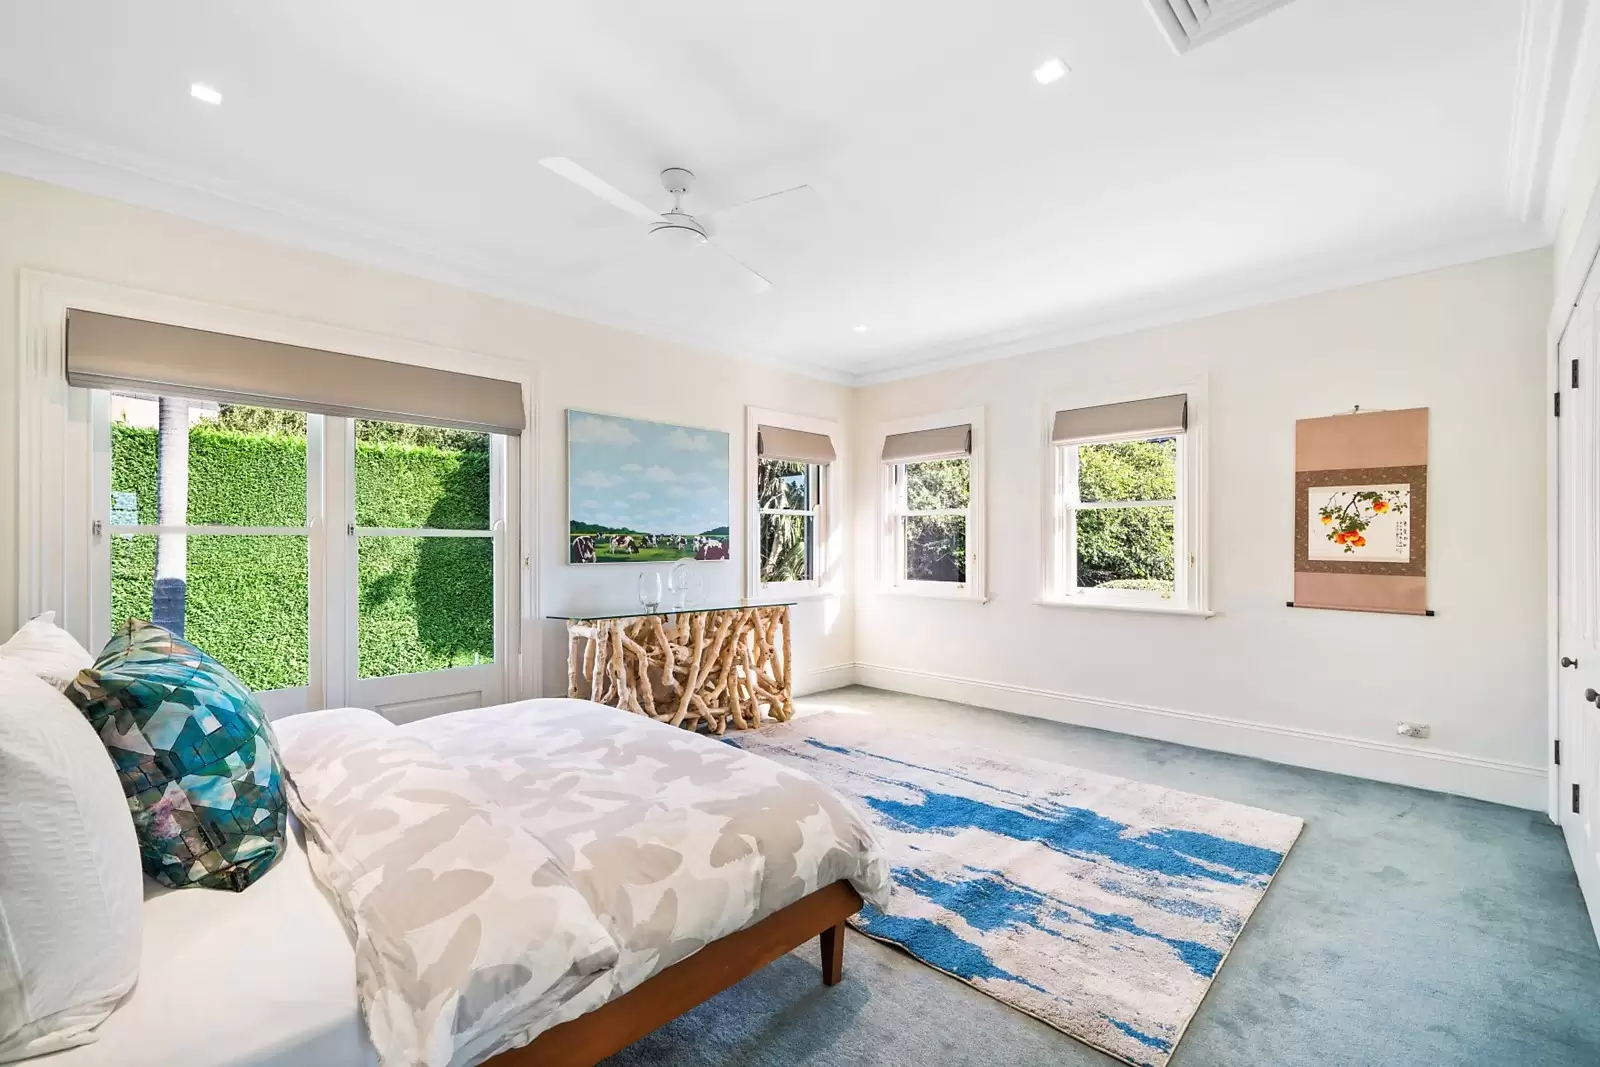 Photo #14: 33 Olphert Avenue, Vaucluse - Sold by Sydney Sotheby's International Realty